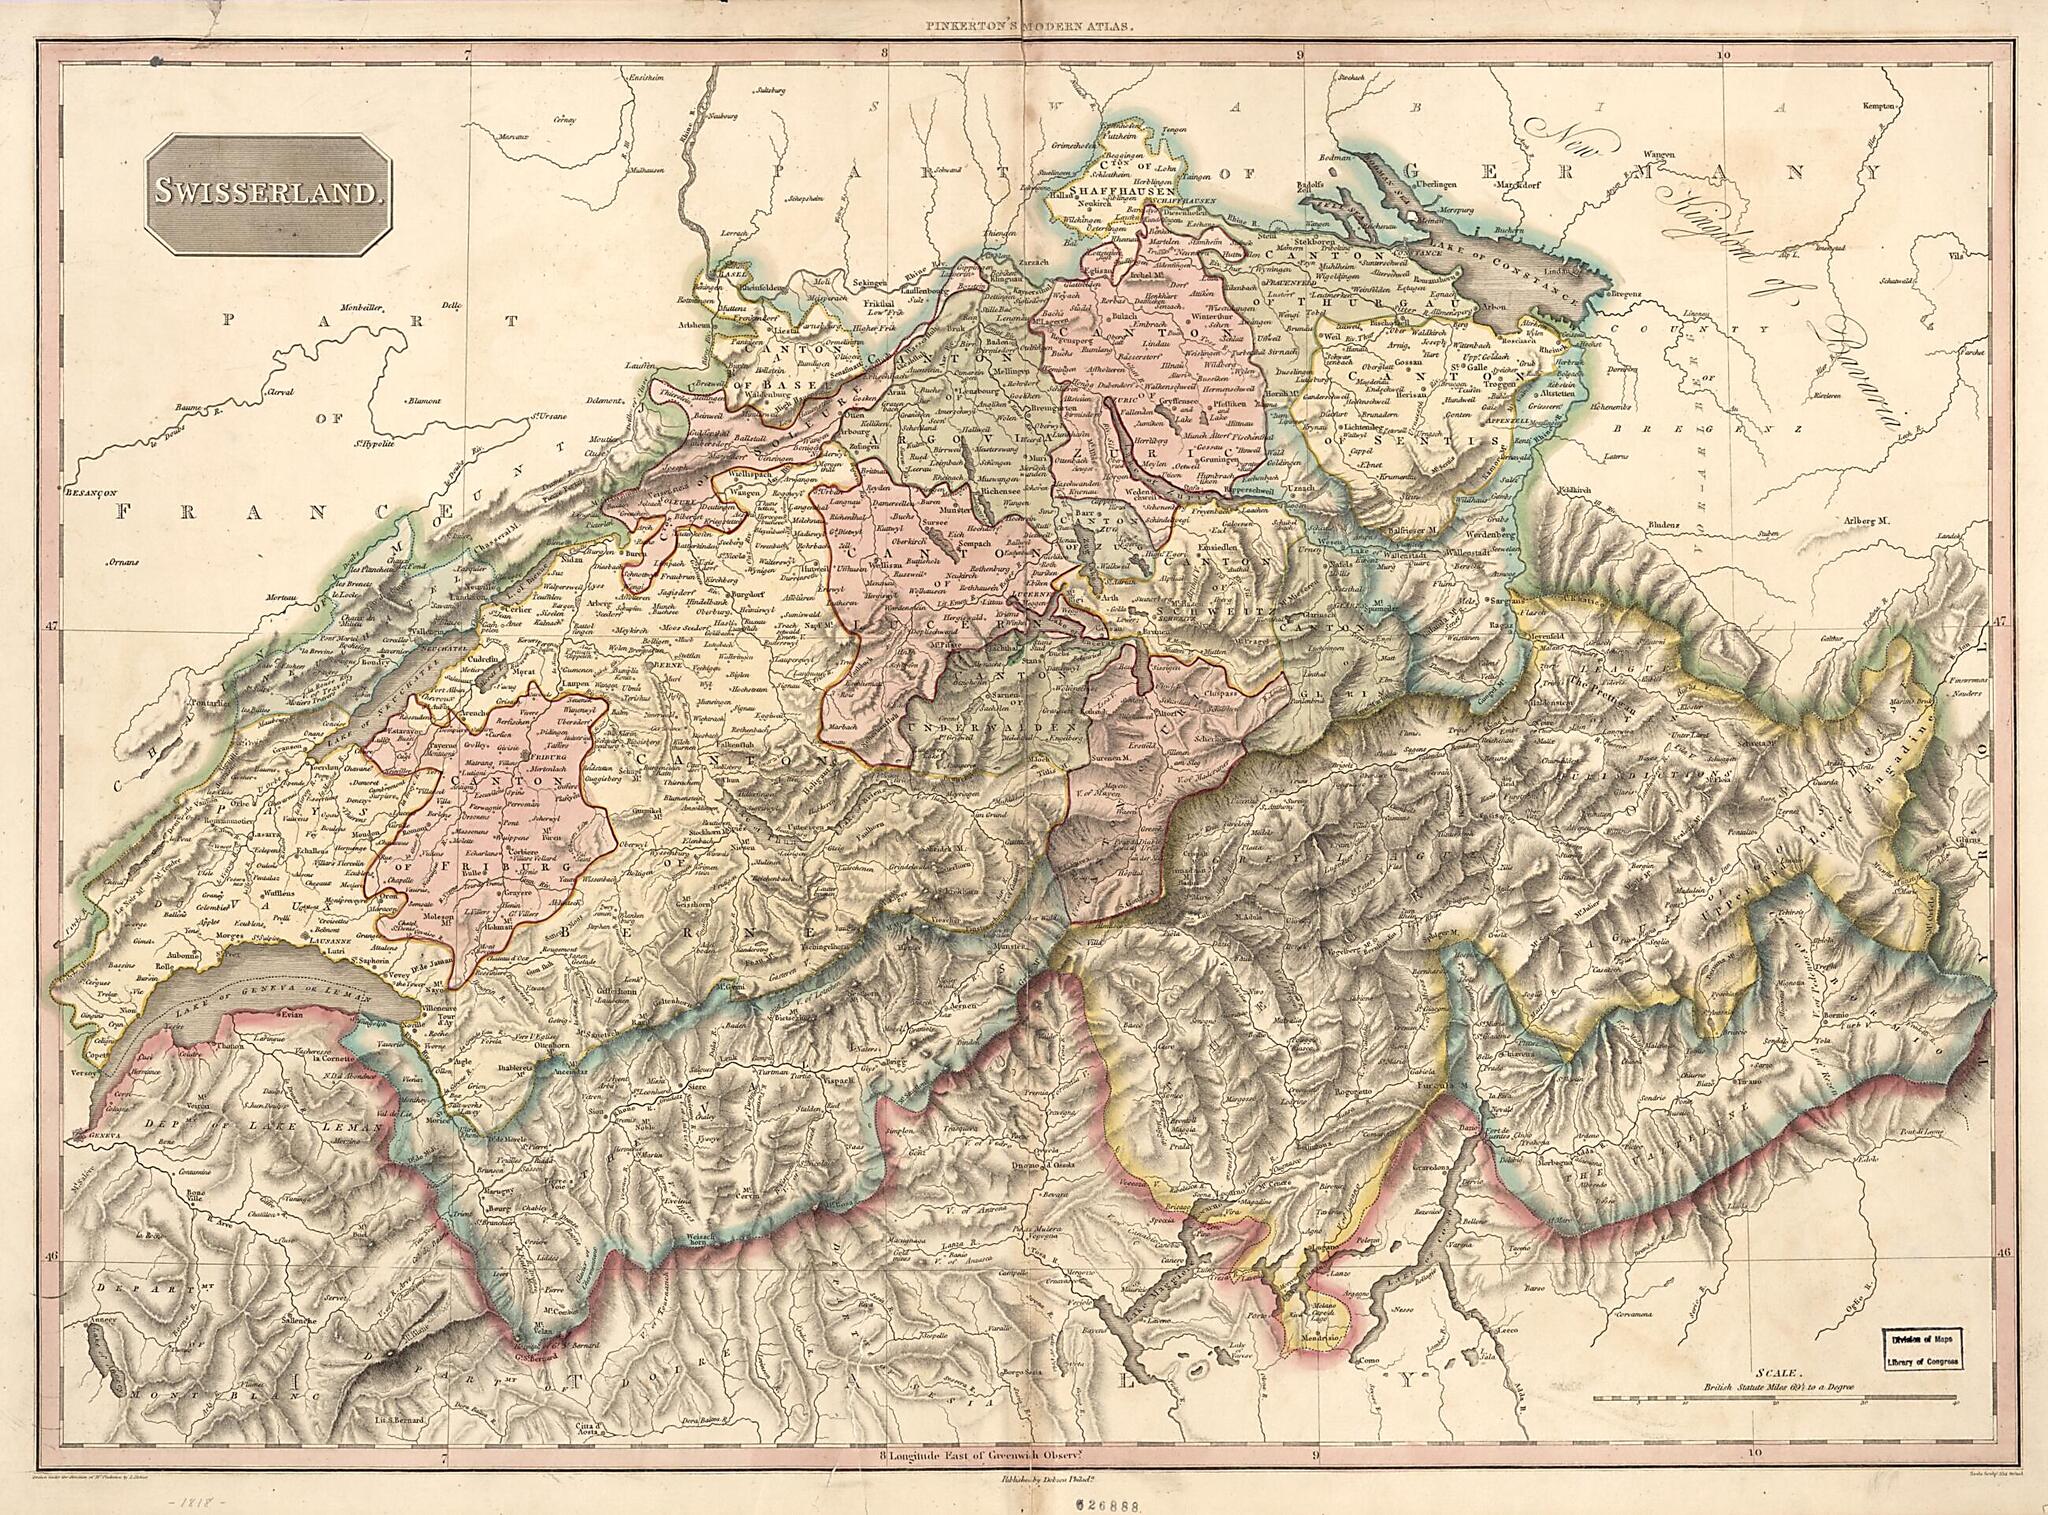 This old map of Swisserland from 1818 was created by Samuel John Neele, John Pinkerton,  Thomas Dobson and Son in 1818